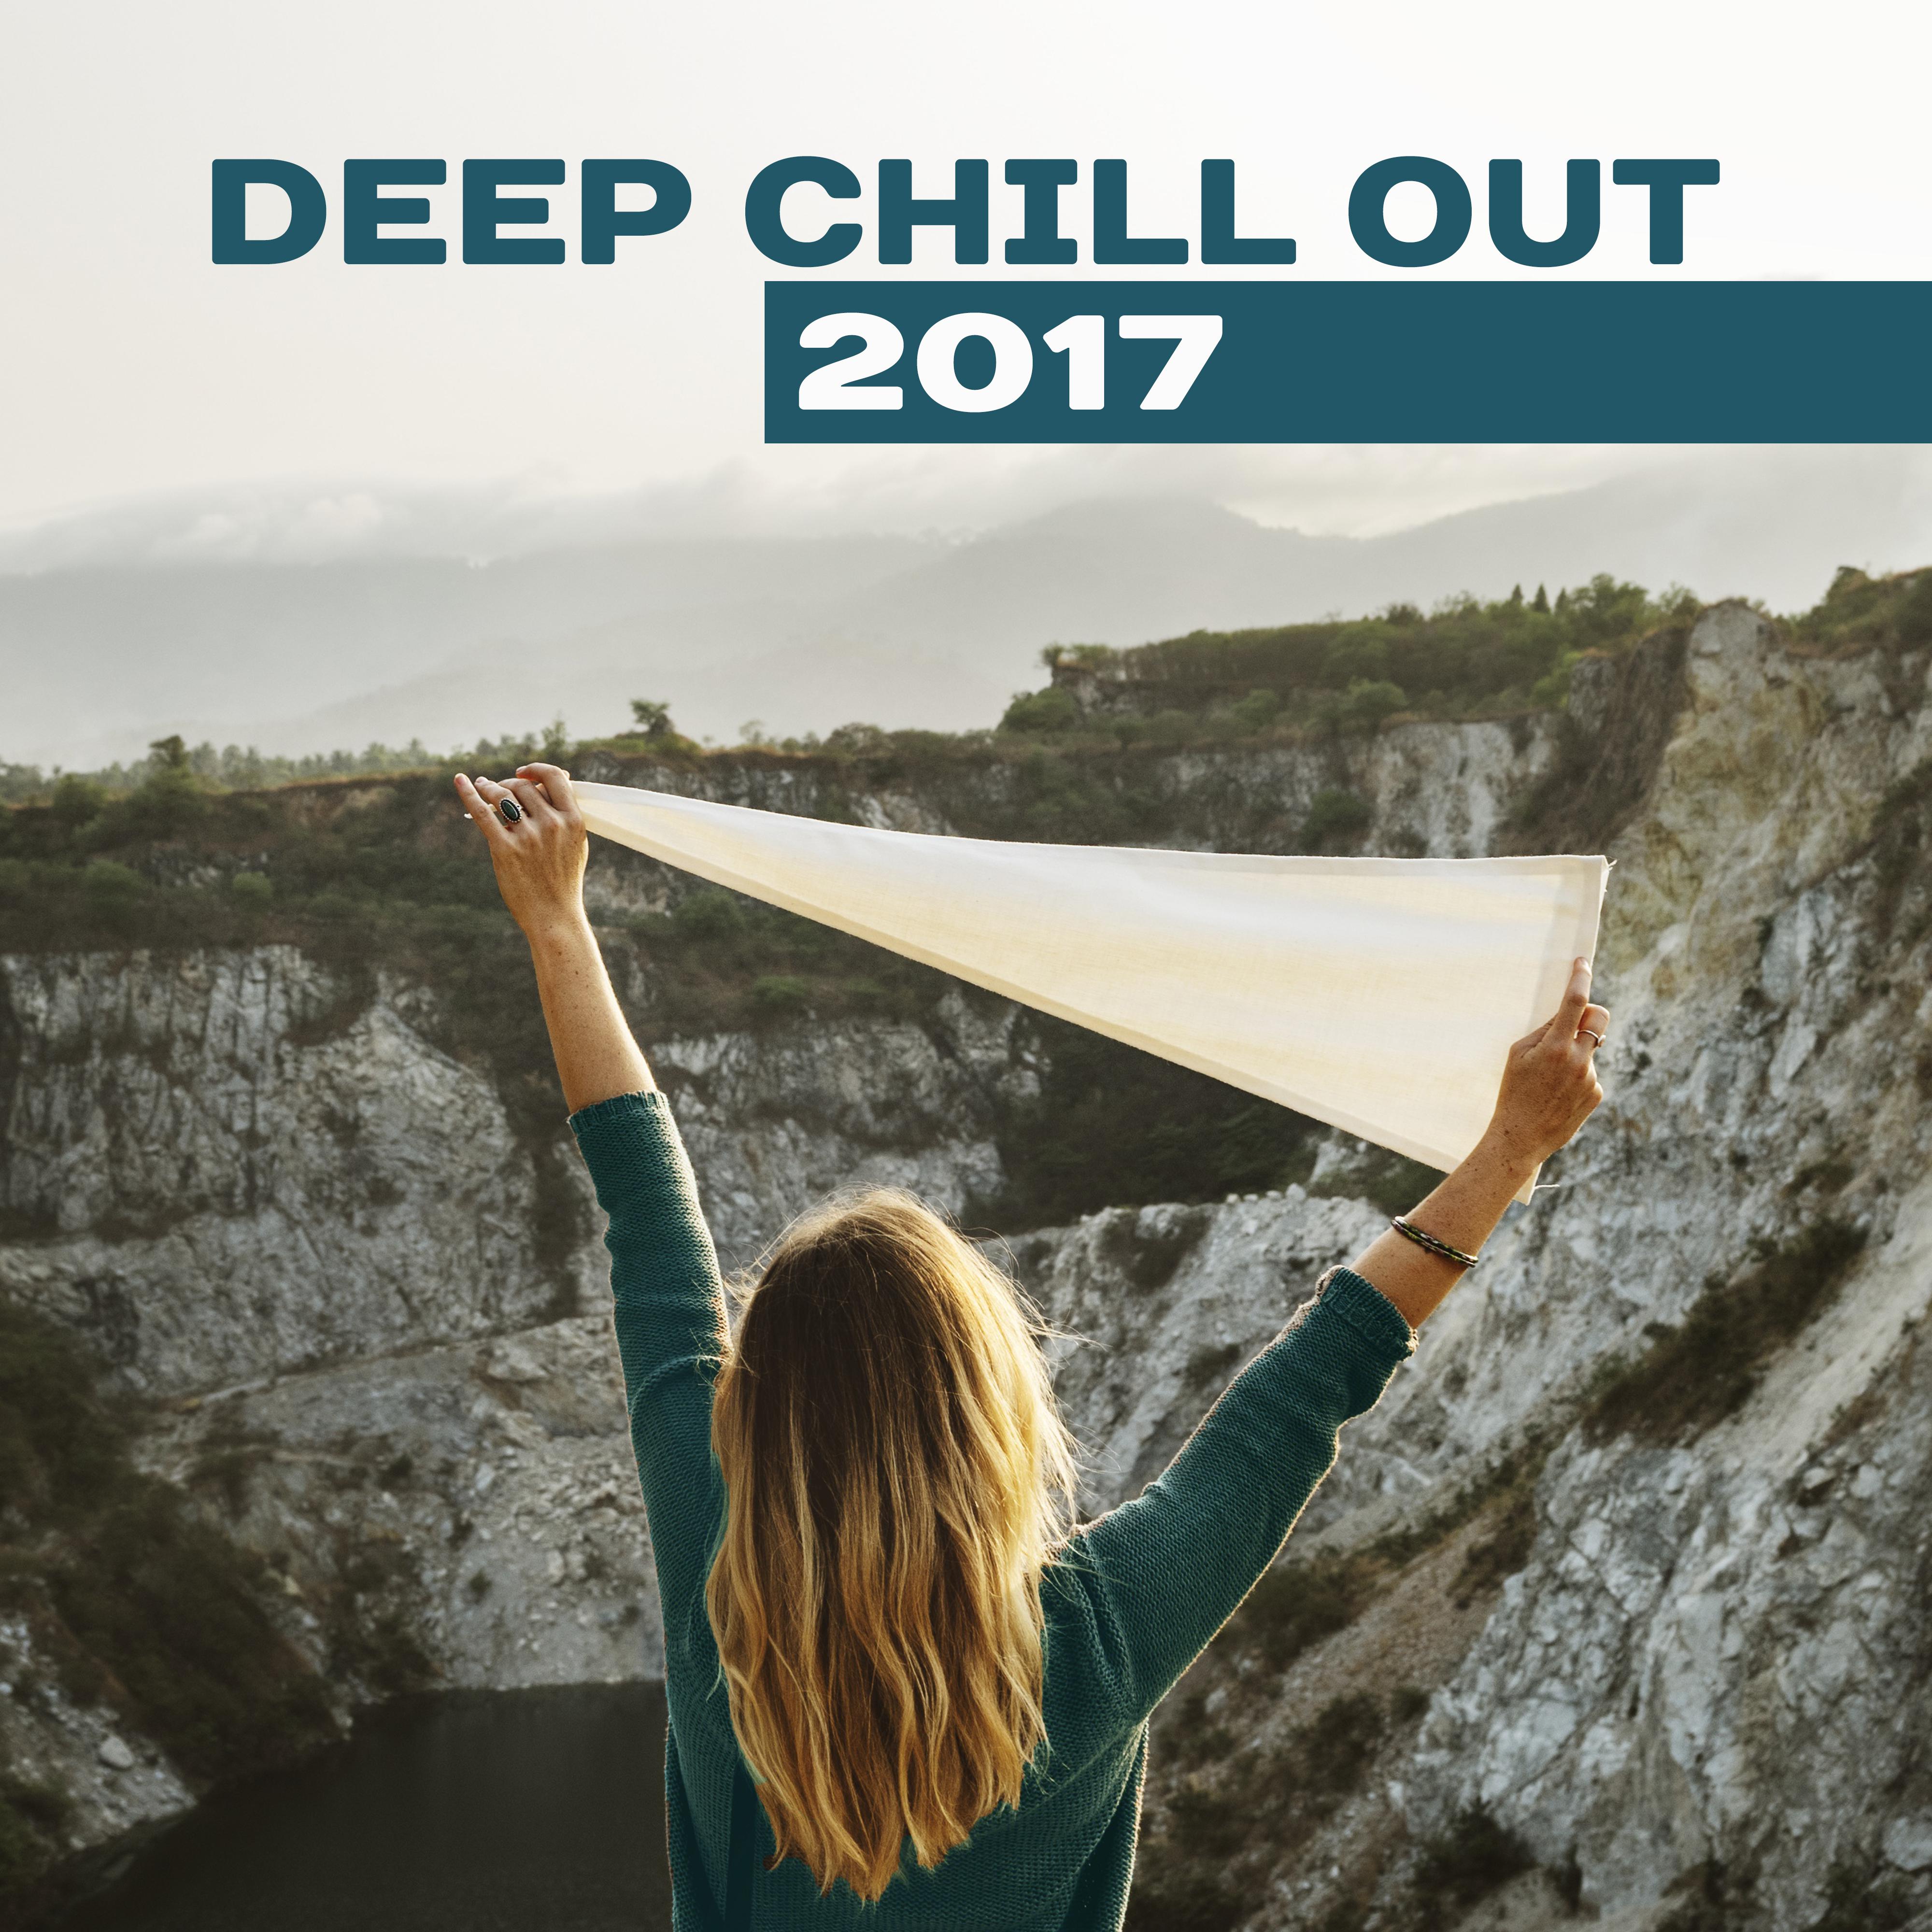 Deep Chill Out 2017 – Summer Beats, Chill Out 2017, Electronic Music, Chill